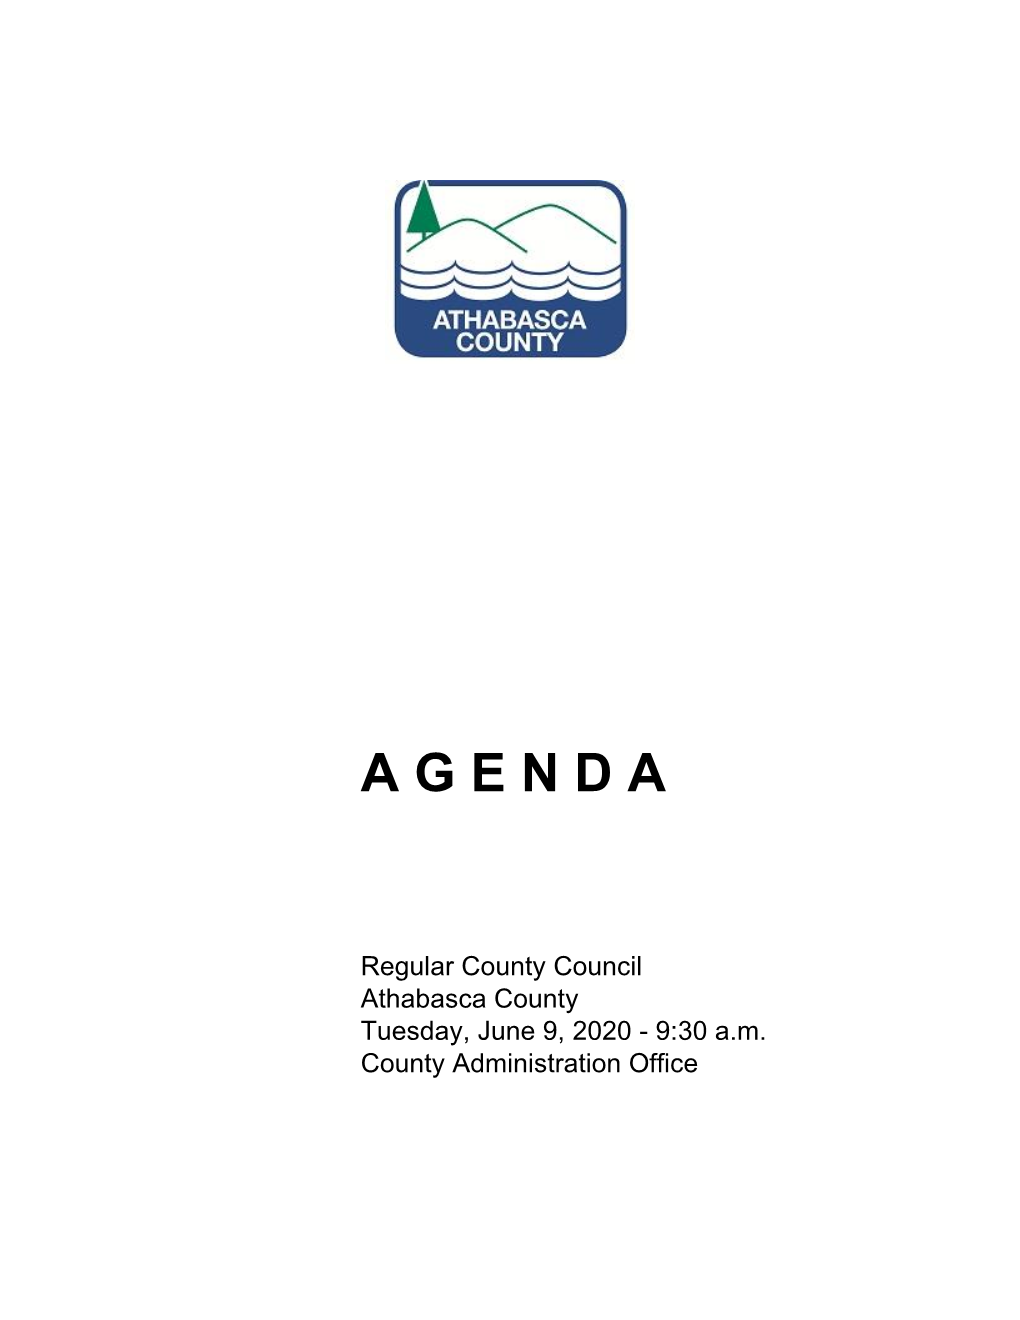 Regular County Council Athabasca County Tuesday, June 9, 2020 - 9:30 A.M